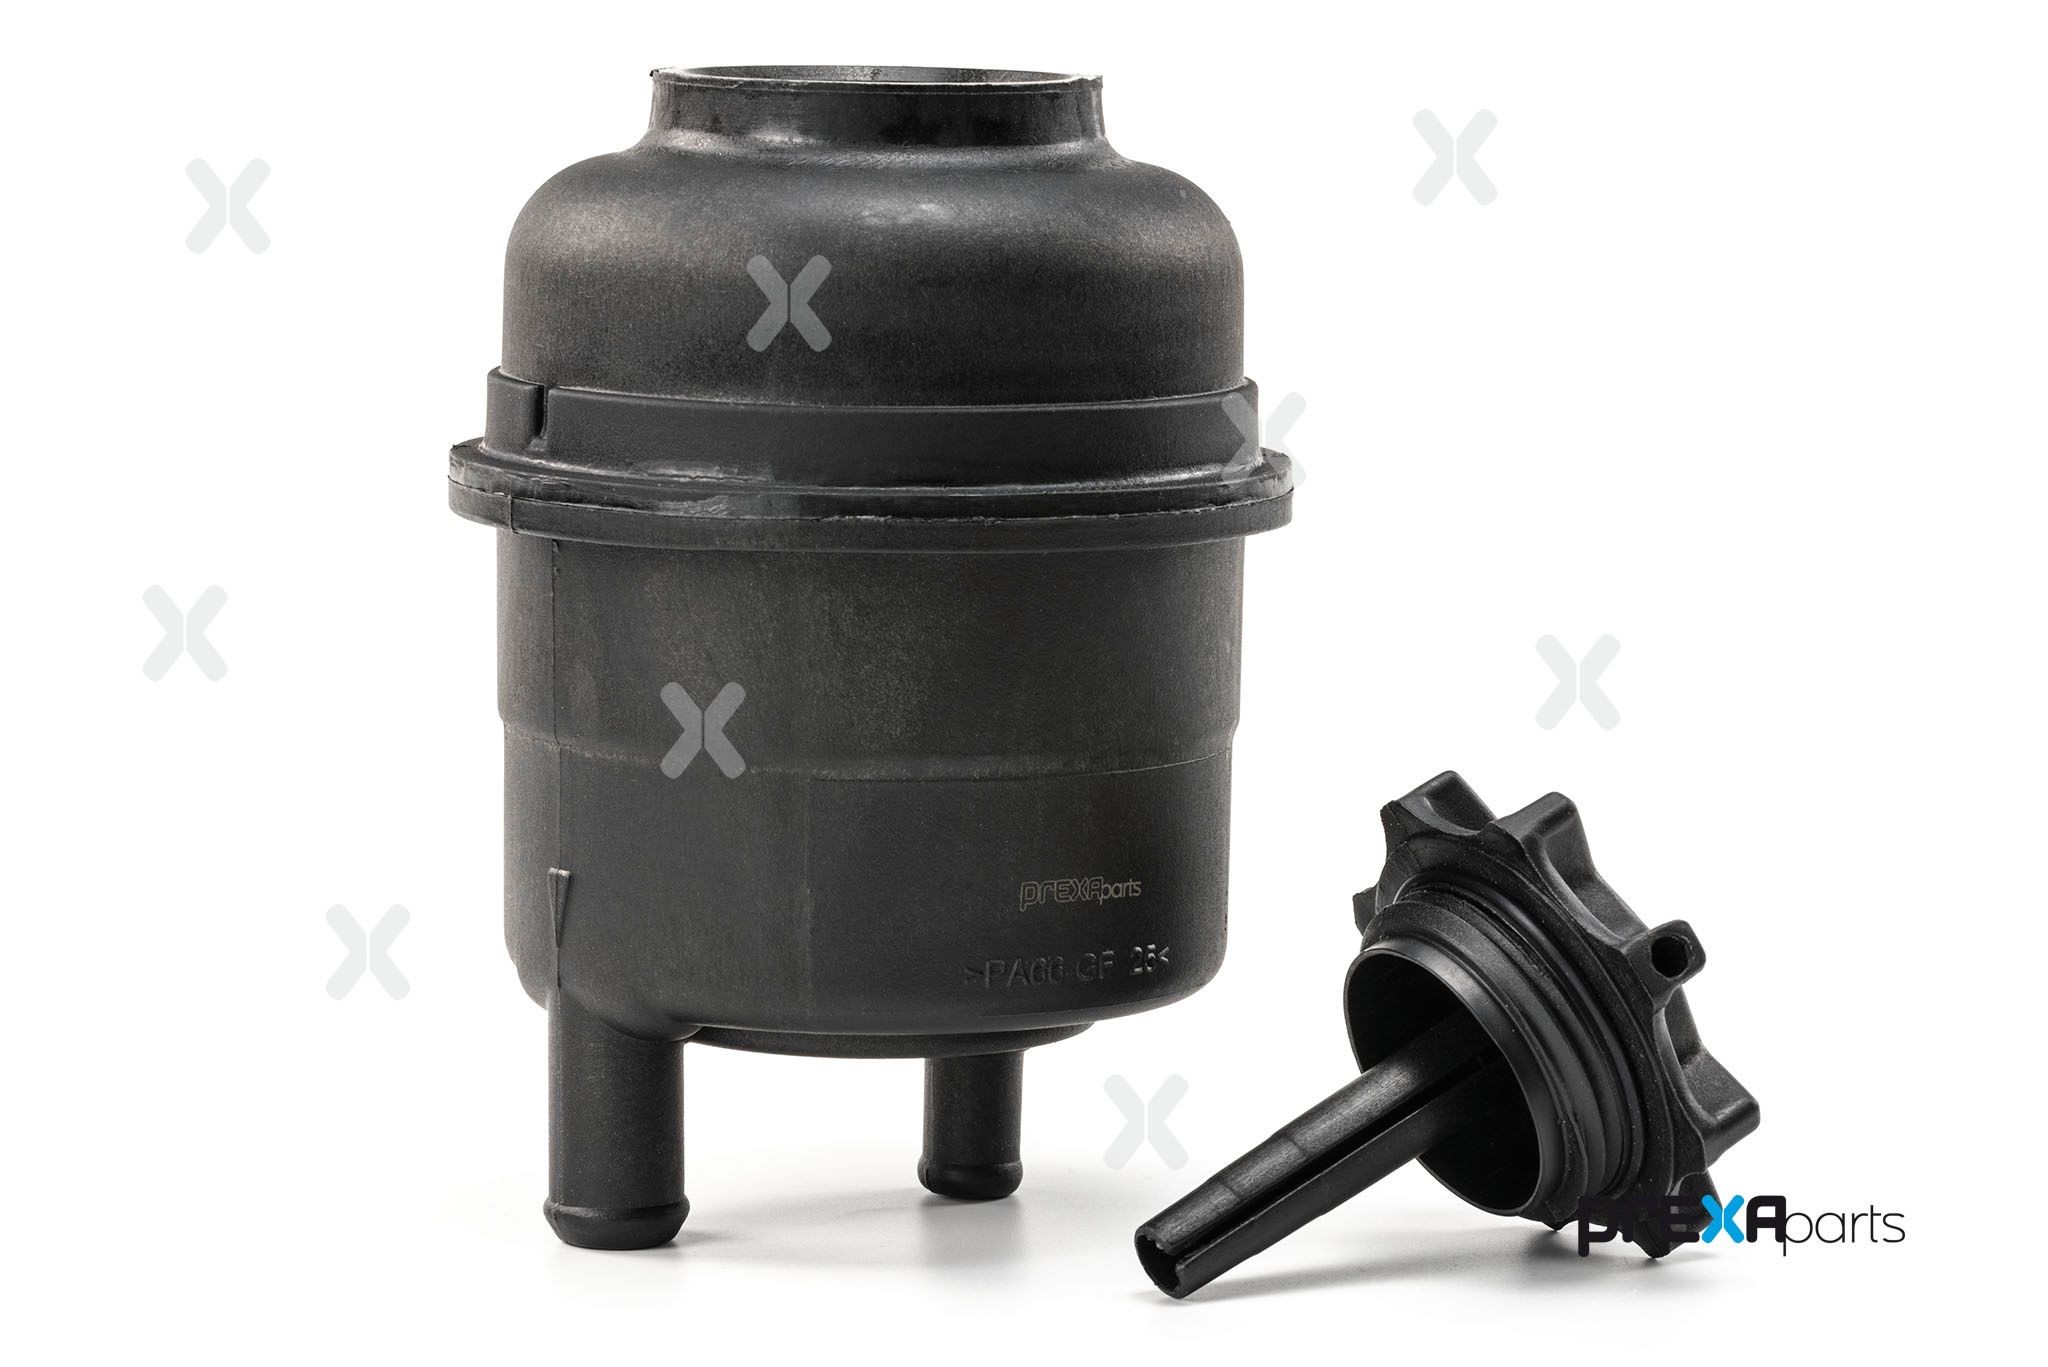 PREXAparts P227010 Expansion Tank, power steering hydraulic oil with lid